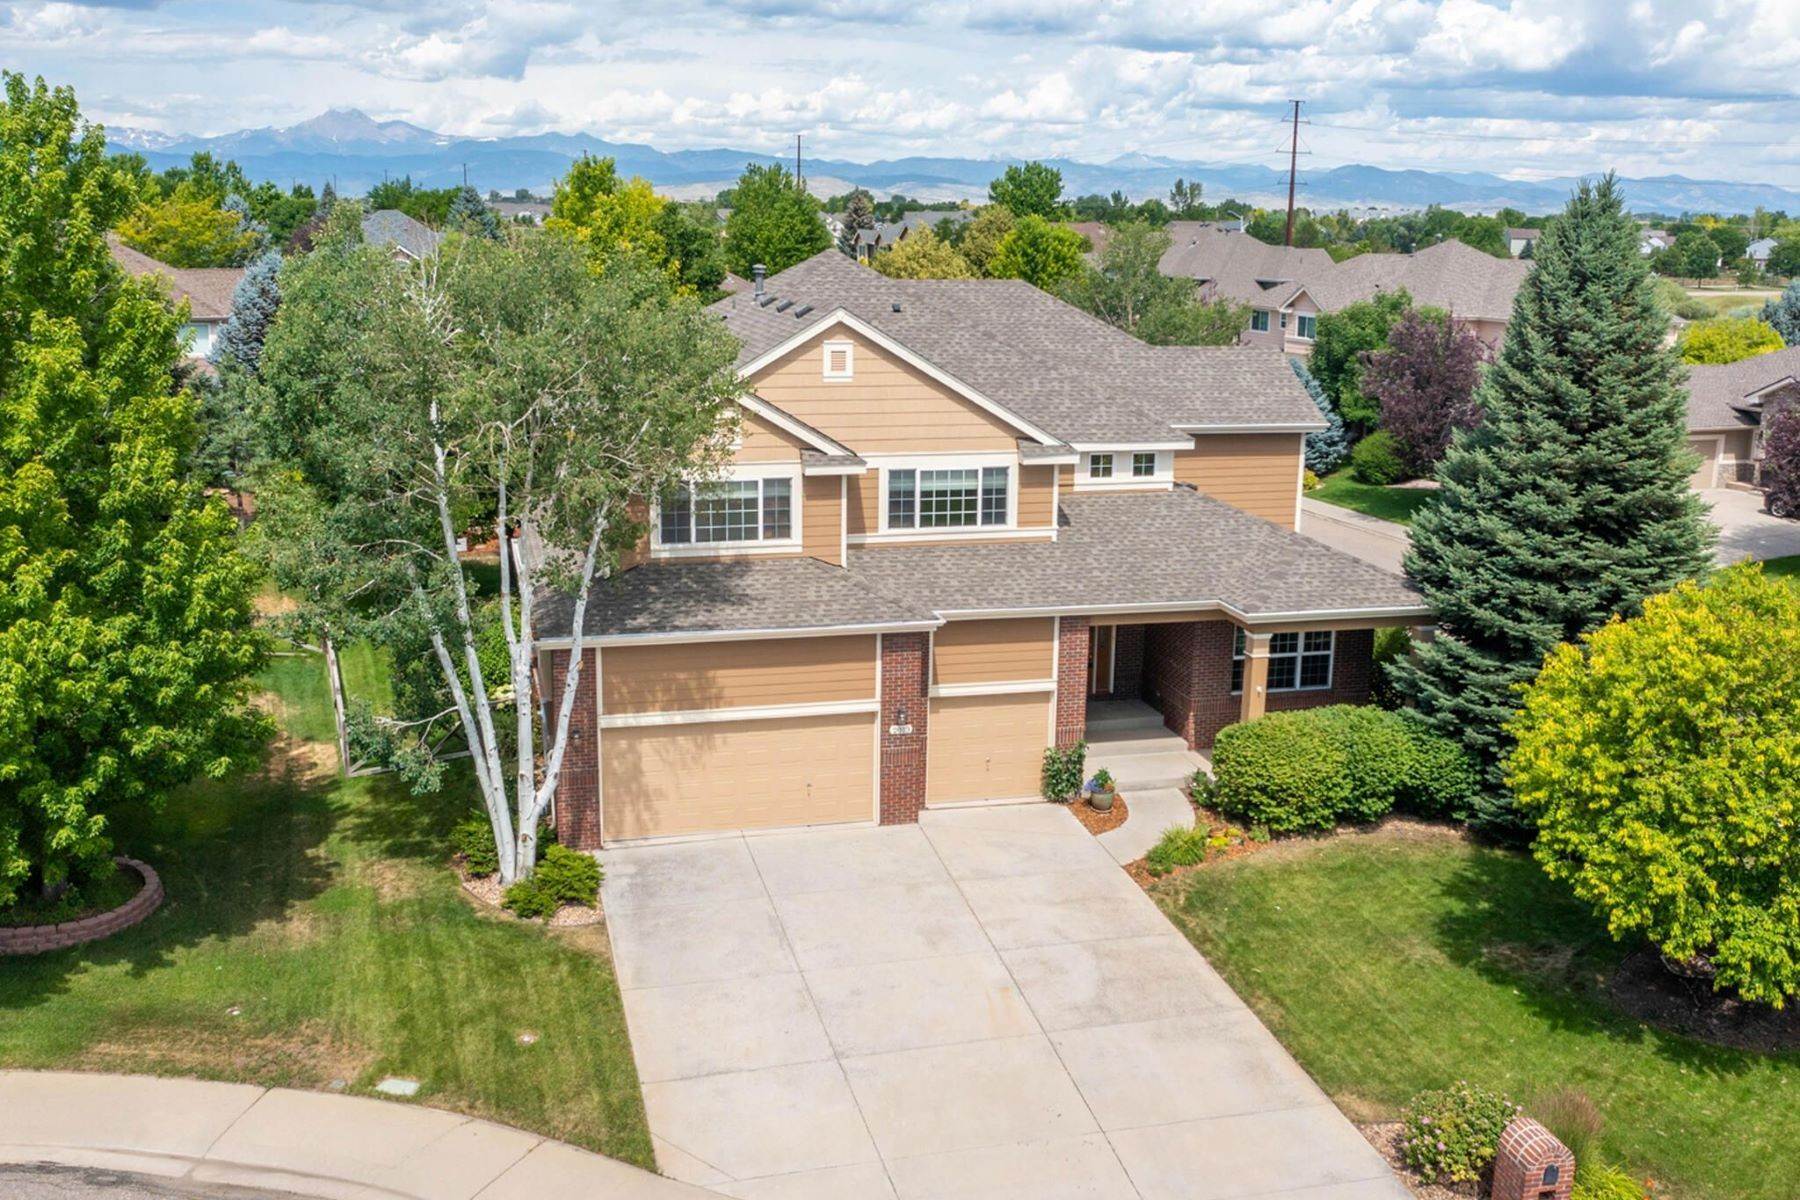 40. Single Family Homes for Active at Open, Sunny Home on a Corner Lot 2013 Prestwick Court Longmont, Colorado 80504 United States